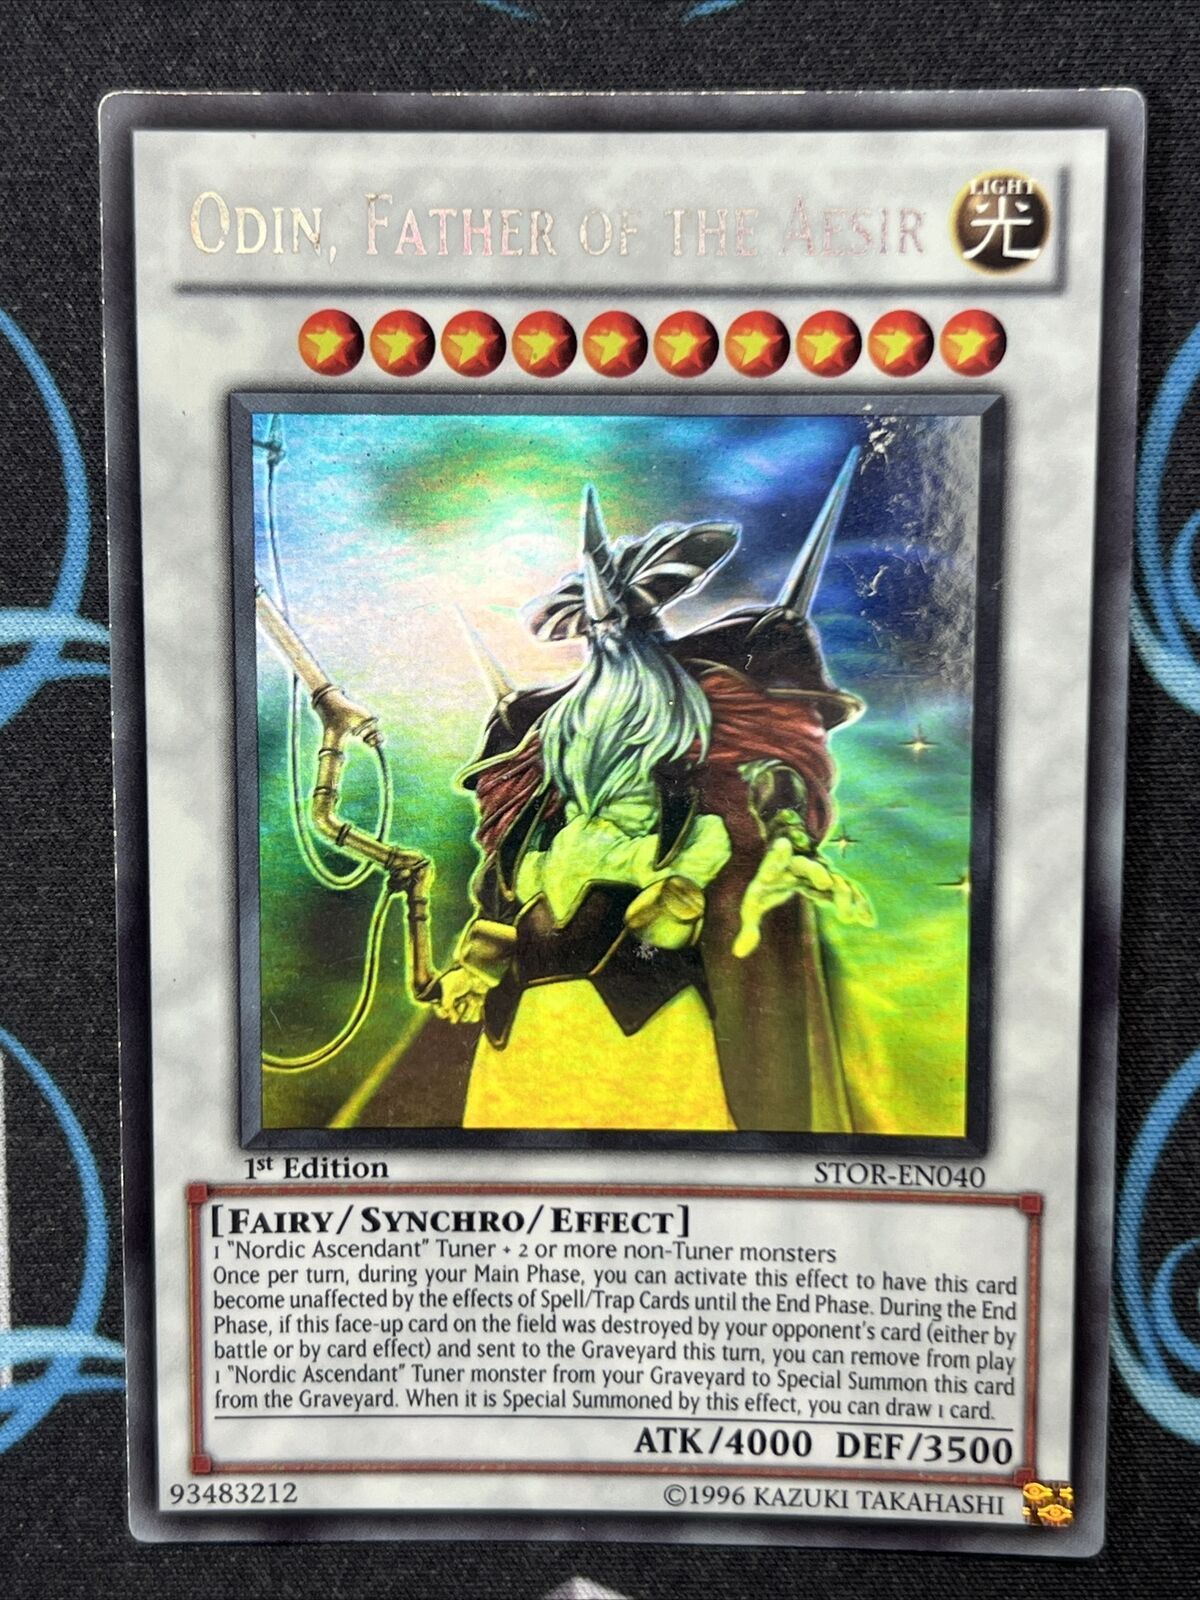 Yugioh Odin, Father of the Aesir stor-en040 1st Edition Ghost Rare HP